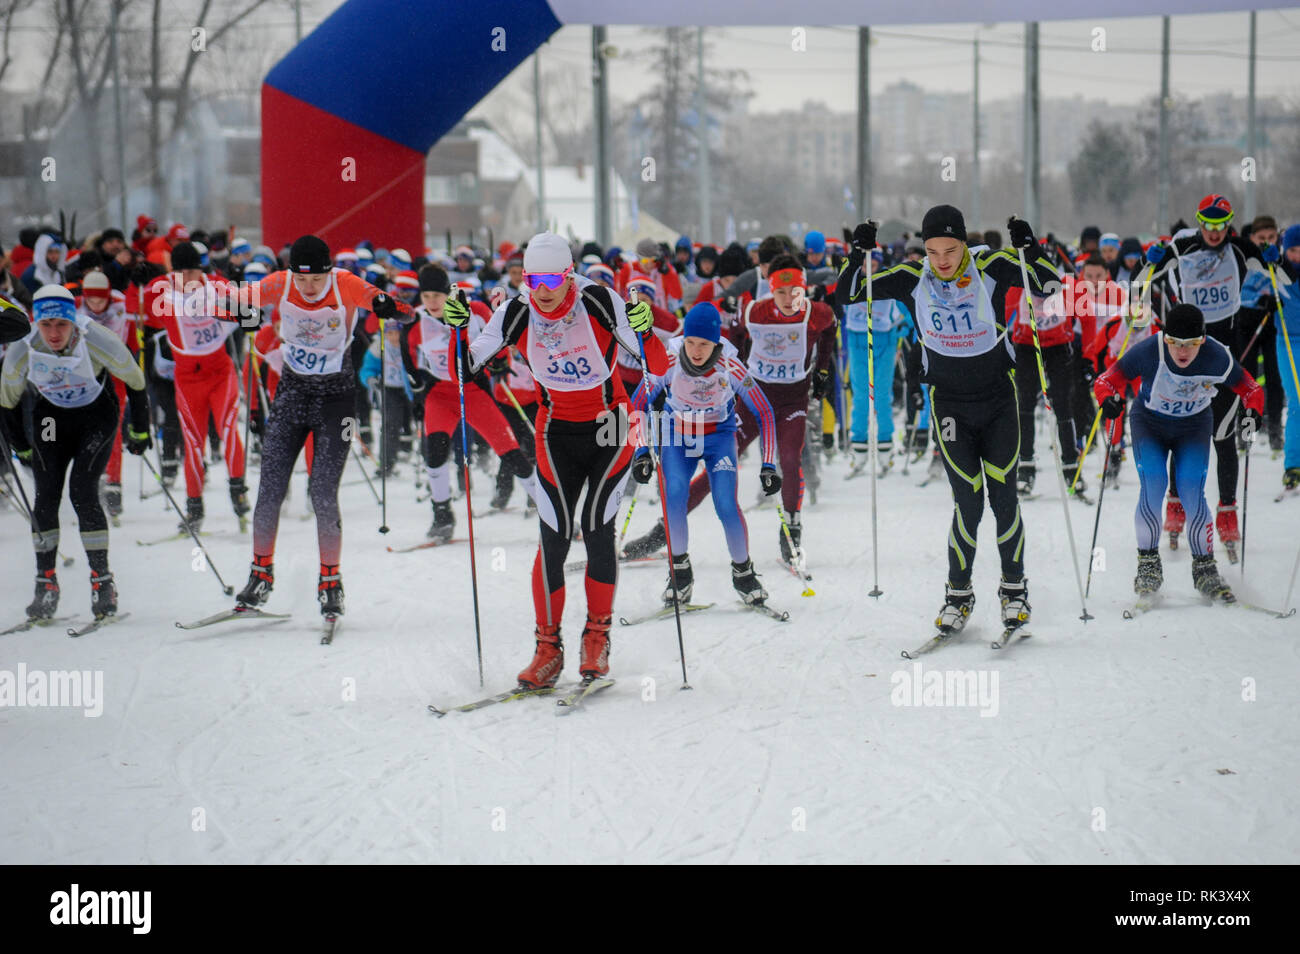 Tambov, Tambov region, Russia. 9th Feb, 2019. February 9, 2019, in the Park '' Friendship ''Tambov (Russia), held XXXVII all-Russian ski race''Ski track of Russia''. It was attended by about 6,000 residents of the Tambov region. The youngest participant was three years and six months old, and the oldest was over 80 years old. In the photo - Participants of the all-Russian ski race ''Ski track of Russia'' in Tambov (Russia) on the ski track. Credit: Demian Stringer/ZUMA Wire/Alamy Live News Stock Photo